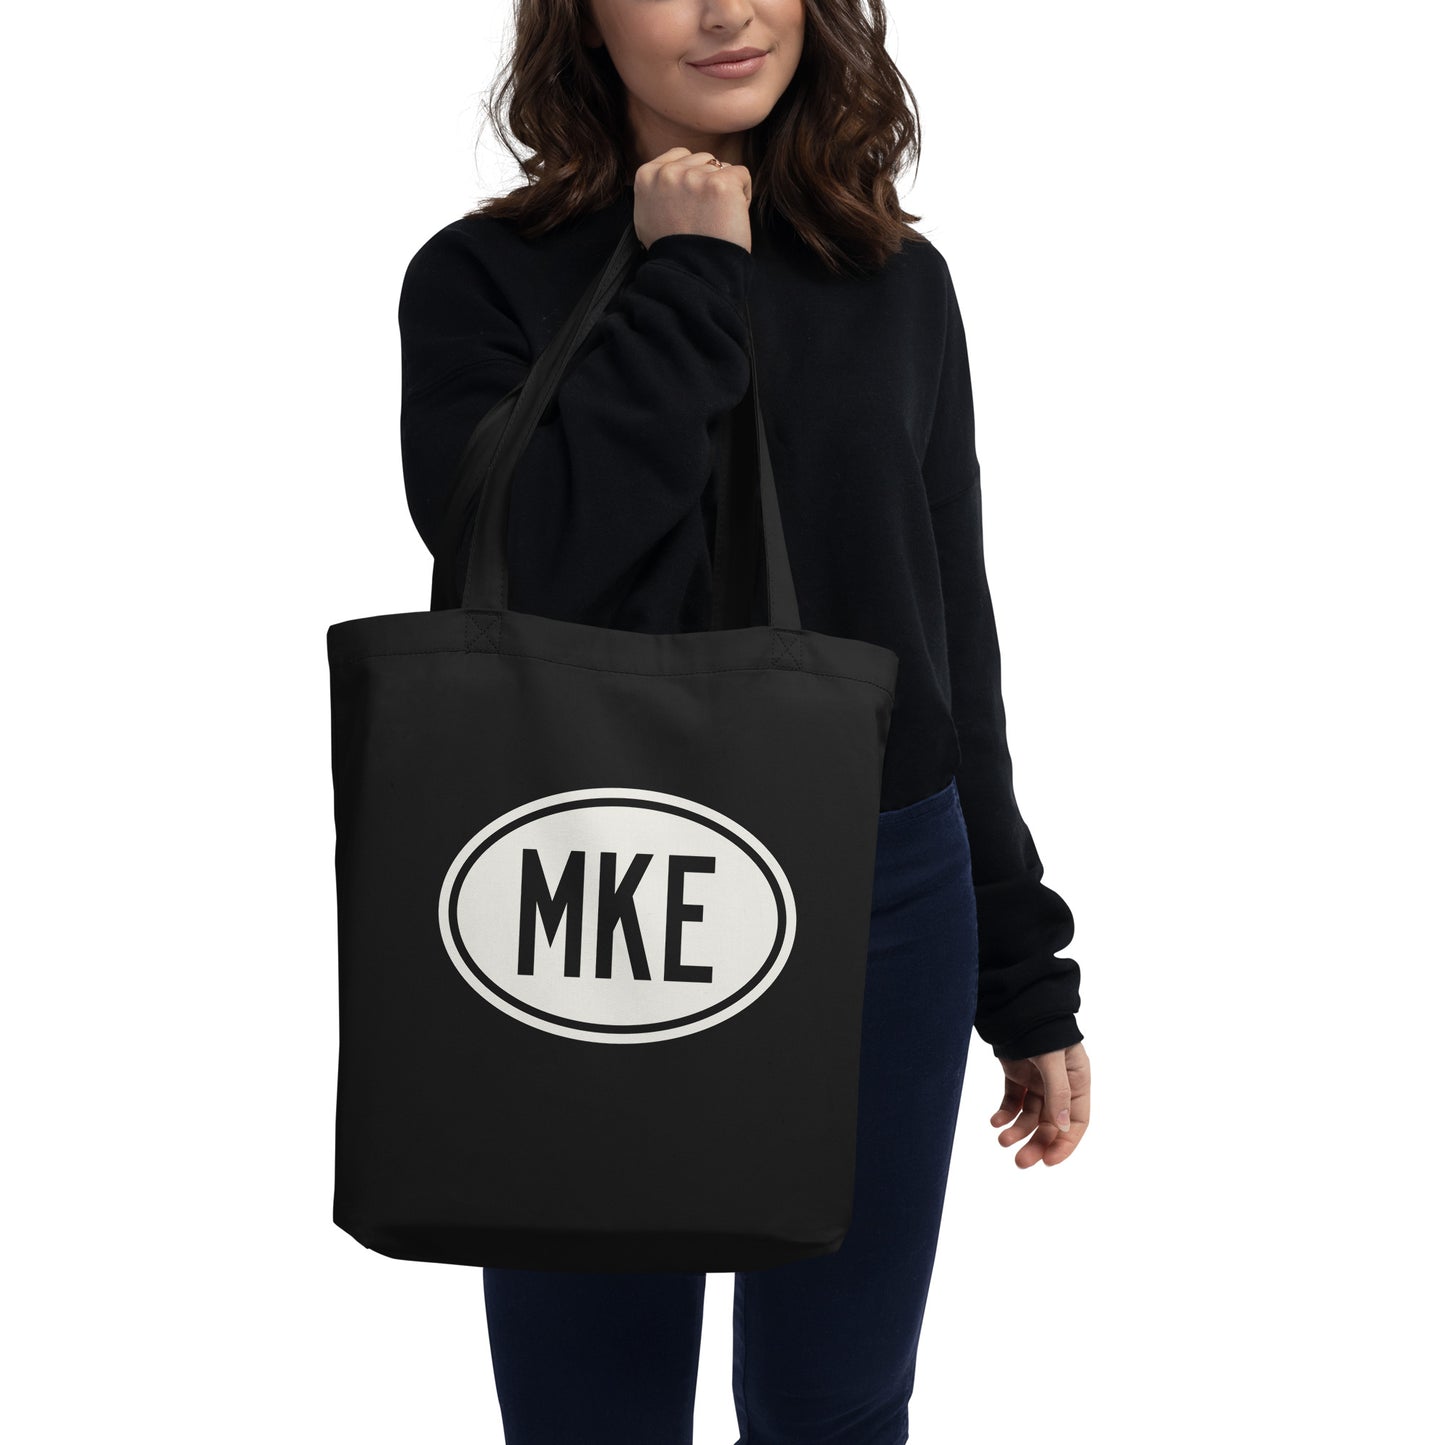 Unique Travel Gift Organic Tote - White Oval • MKE Milwaukee • YHM Designs - Image 03